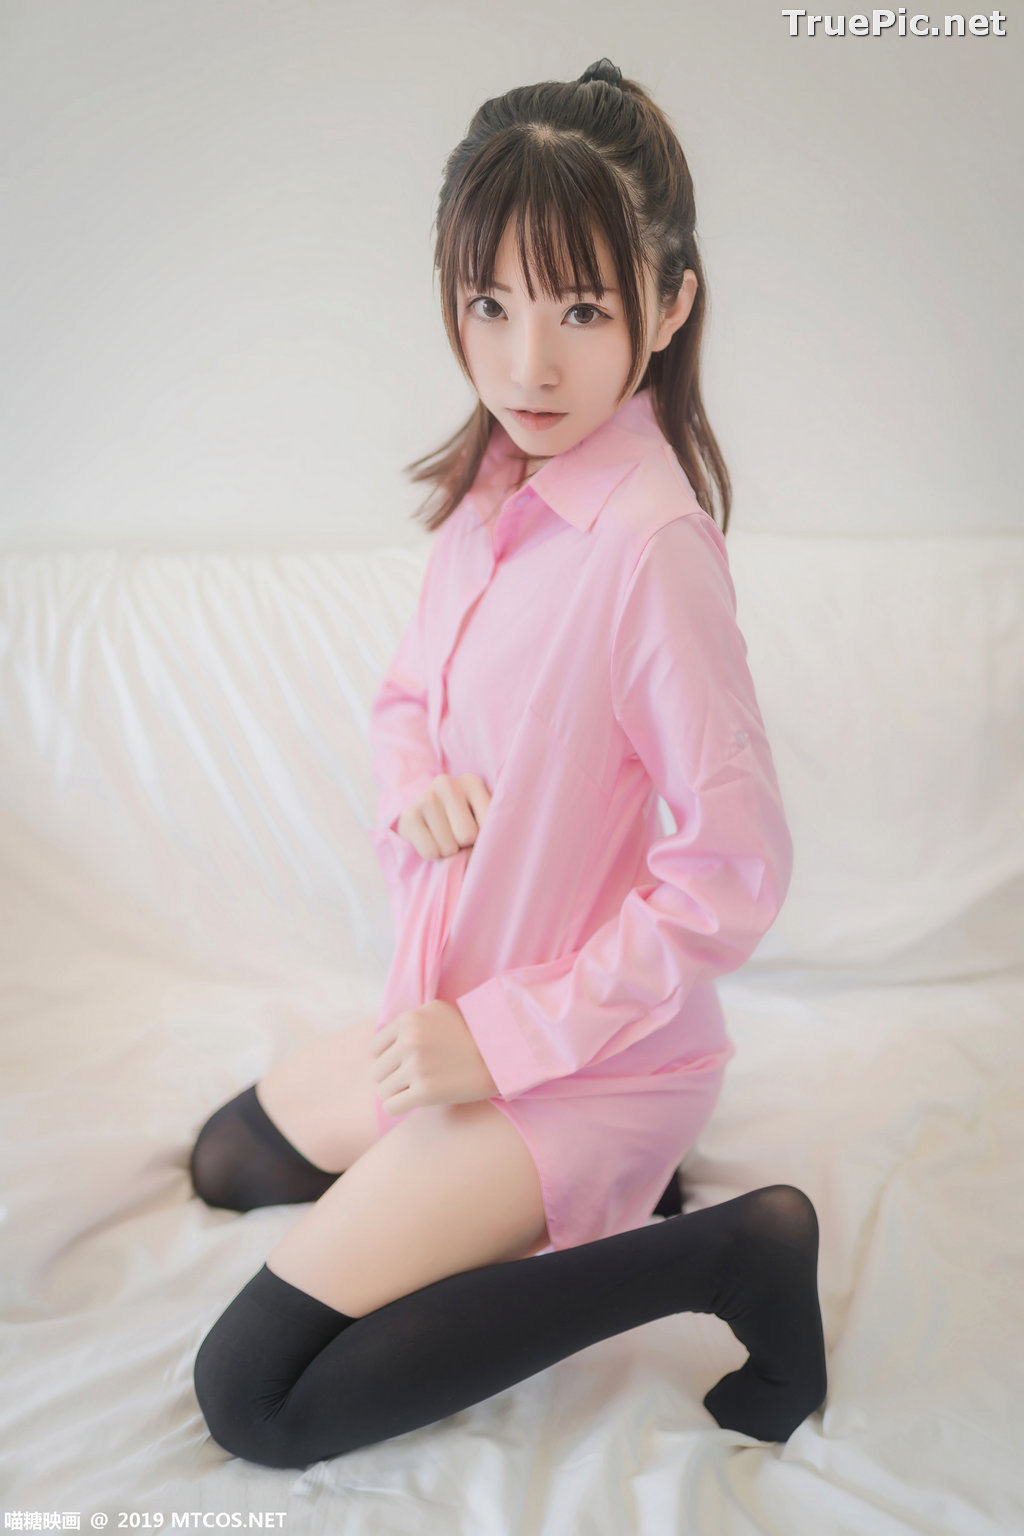 Image [MTCos] 喵糖映画 Vol.022 – Chinese Model – Pink Shirt and Black Stockings - TruePic.net - Picture-32